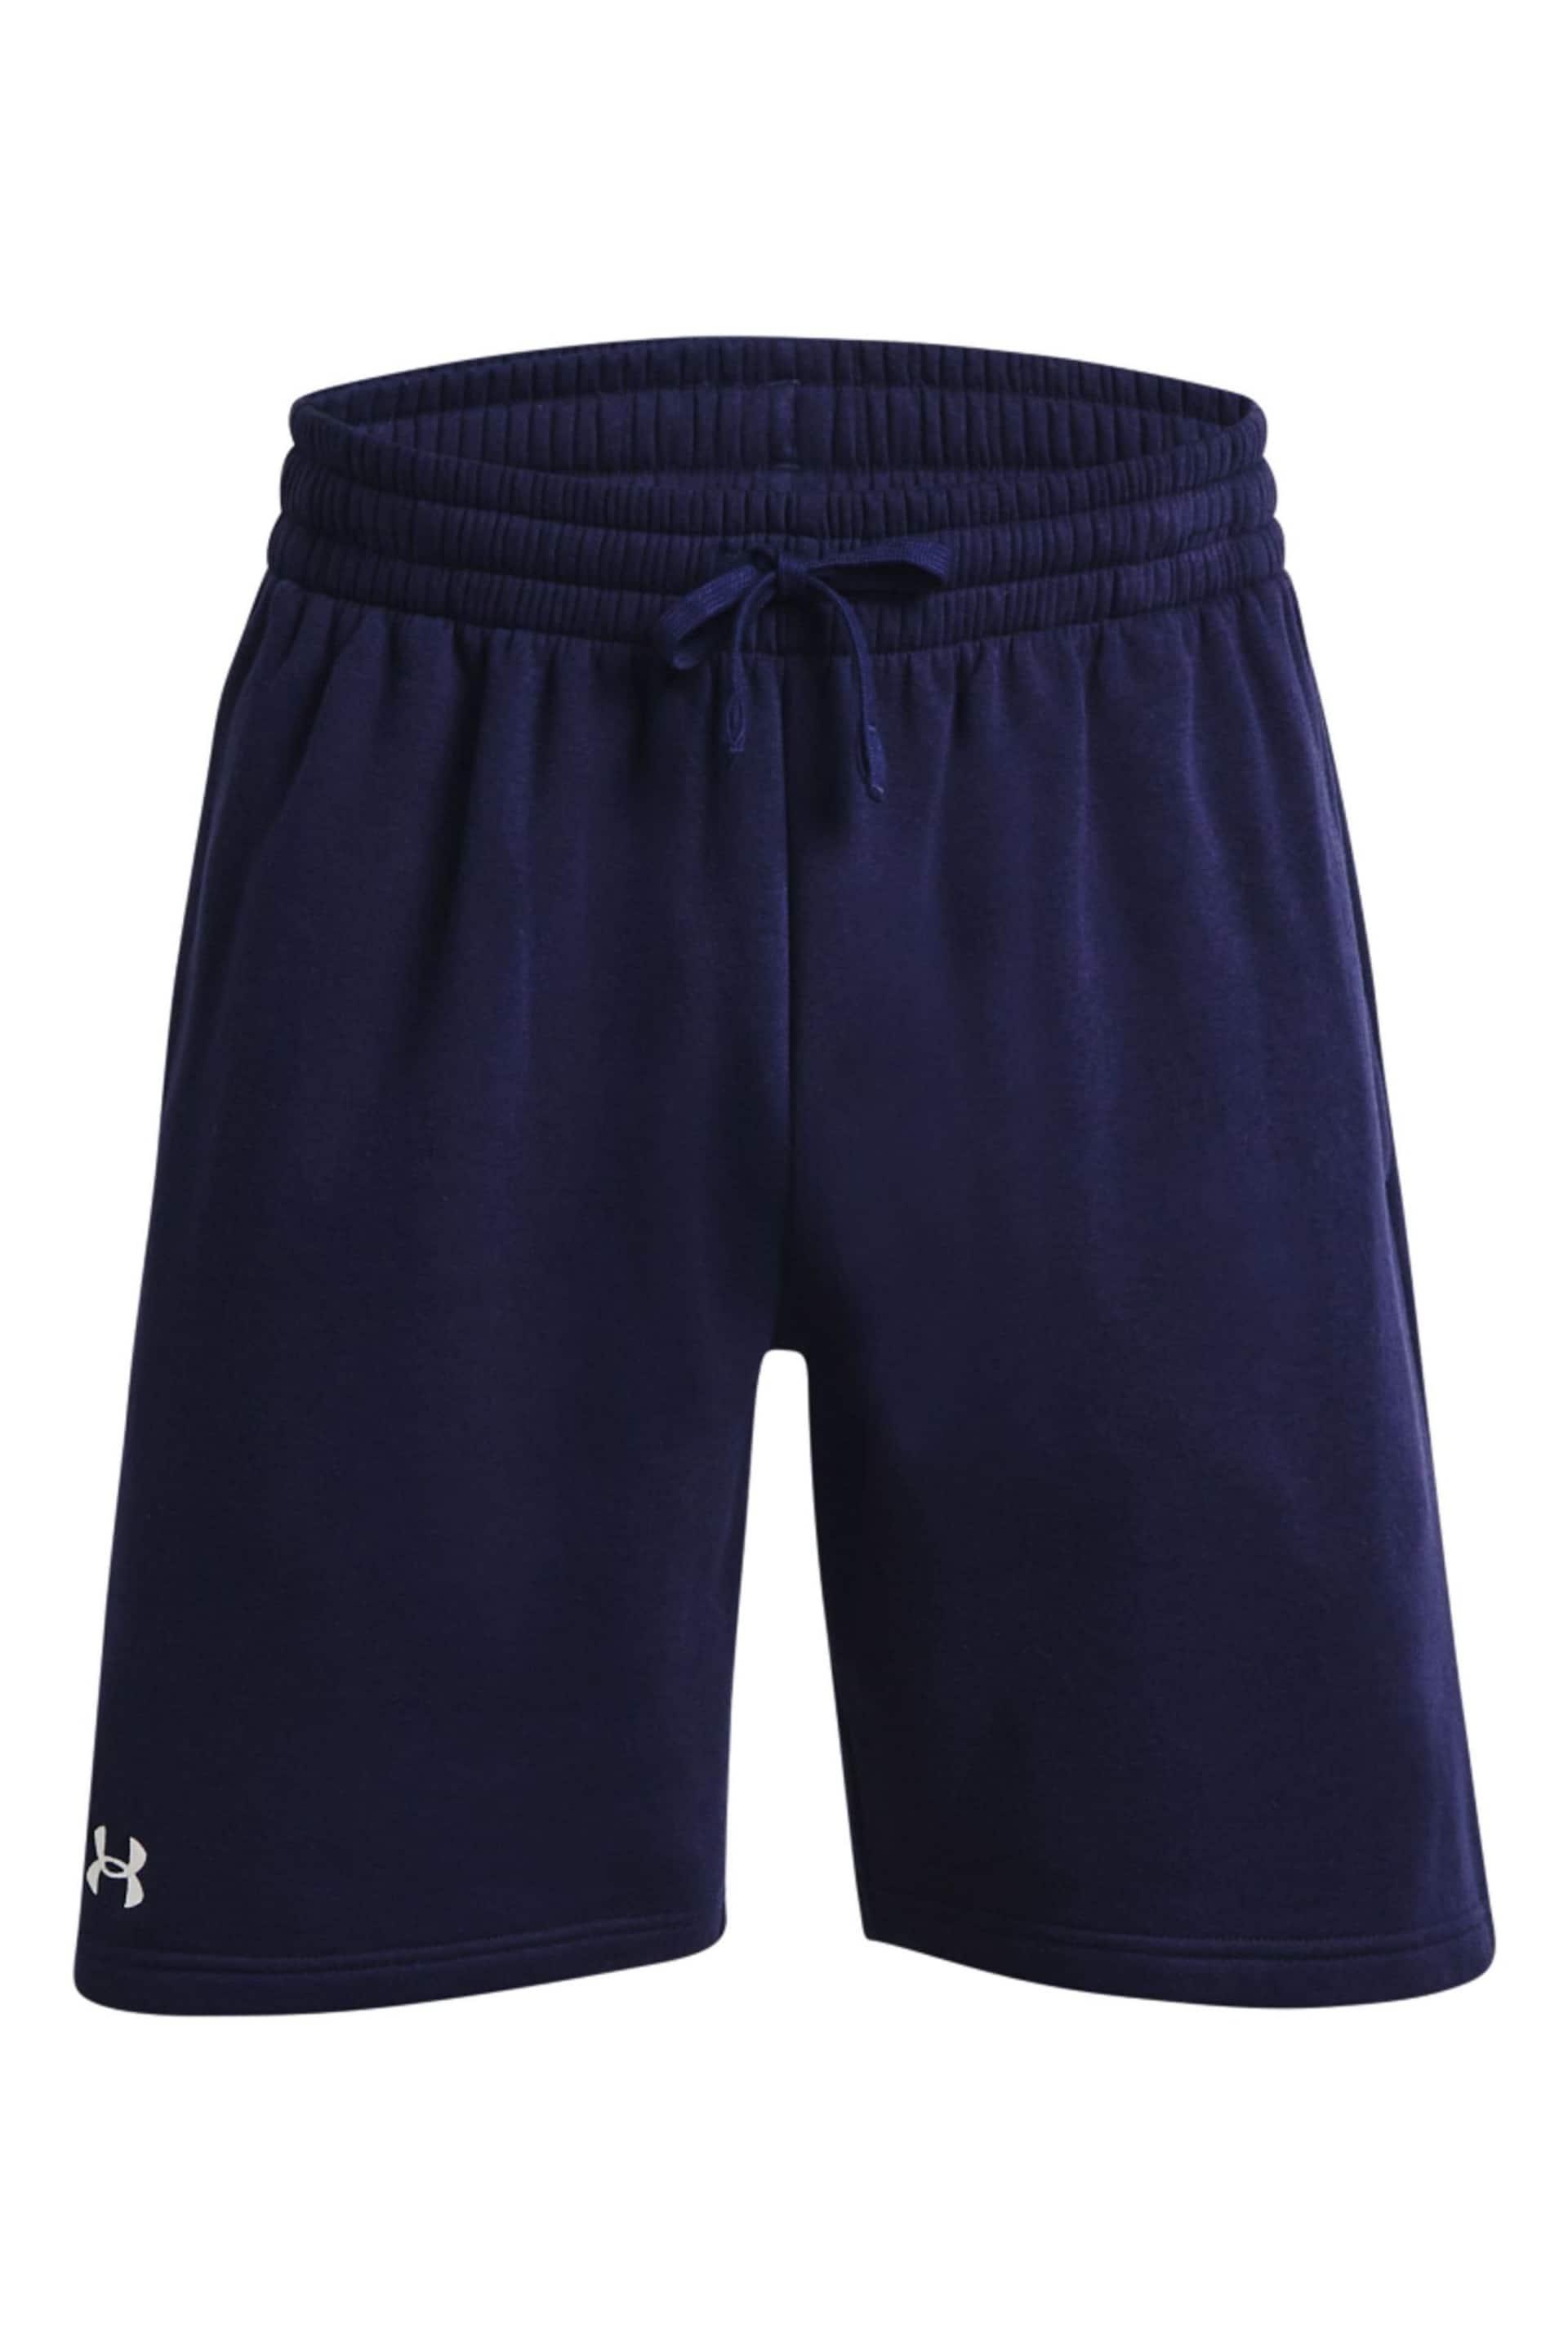 Under Armour Navy Blue/White Rival Fleece Shorts - Image 5 of 6